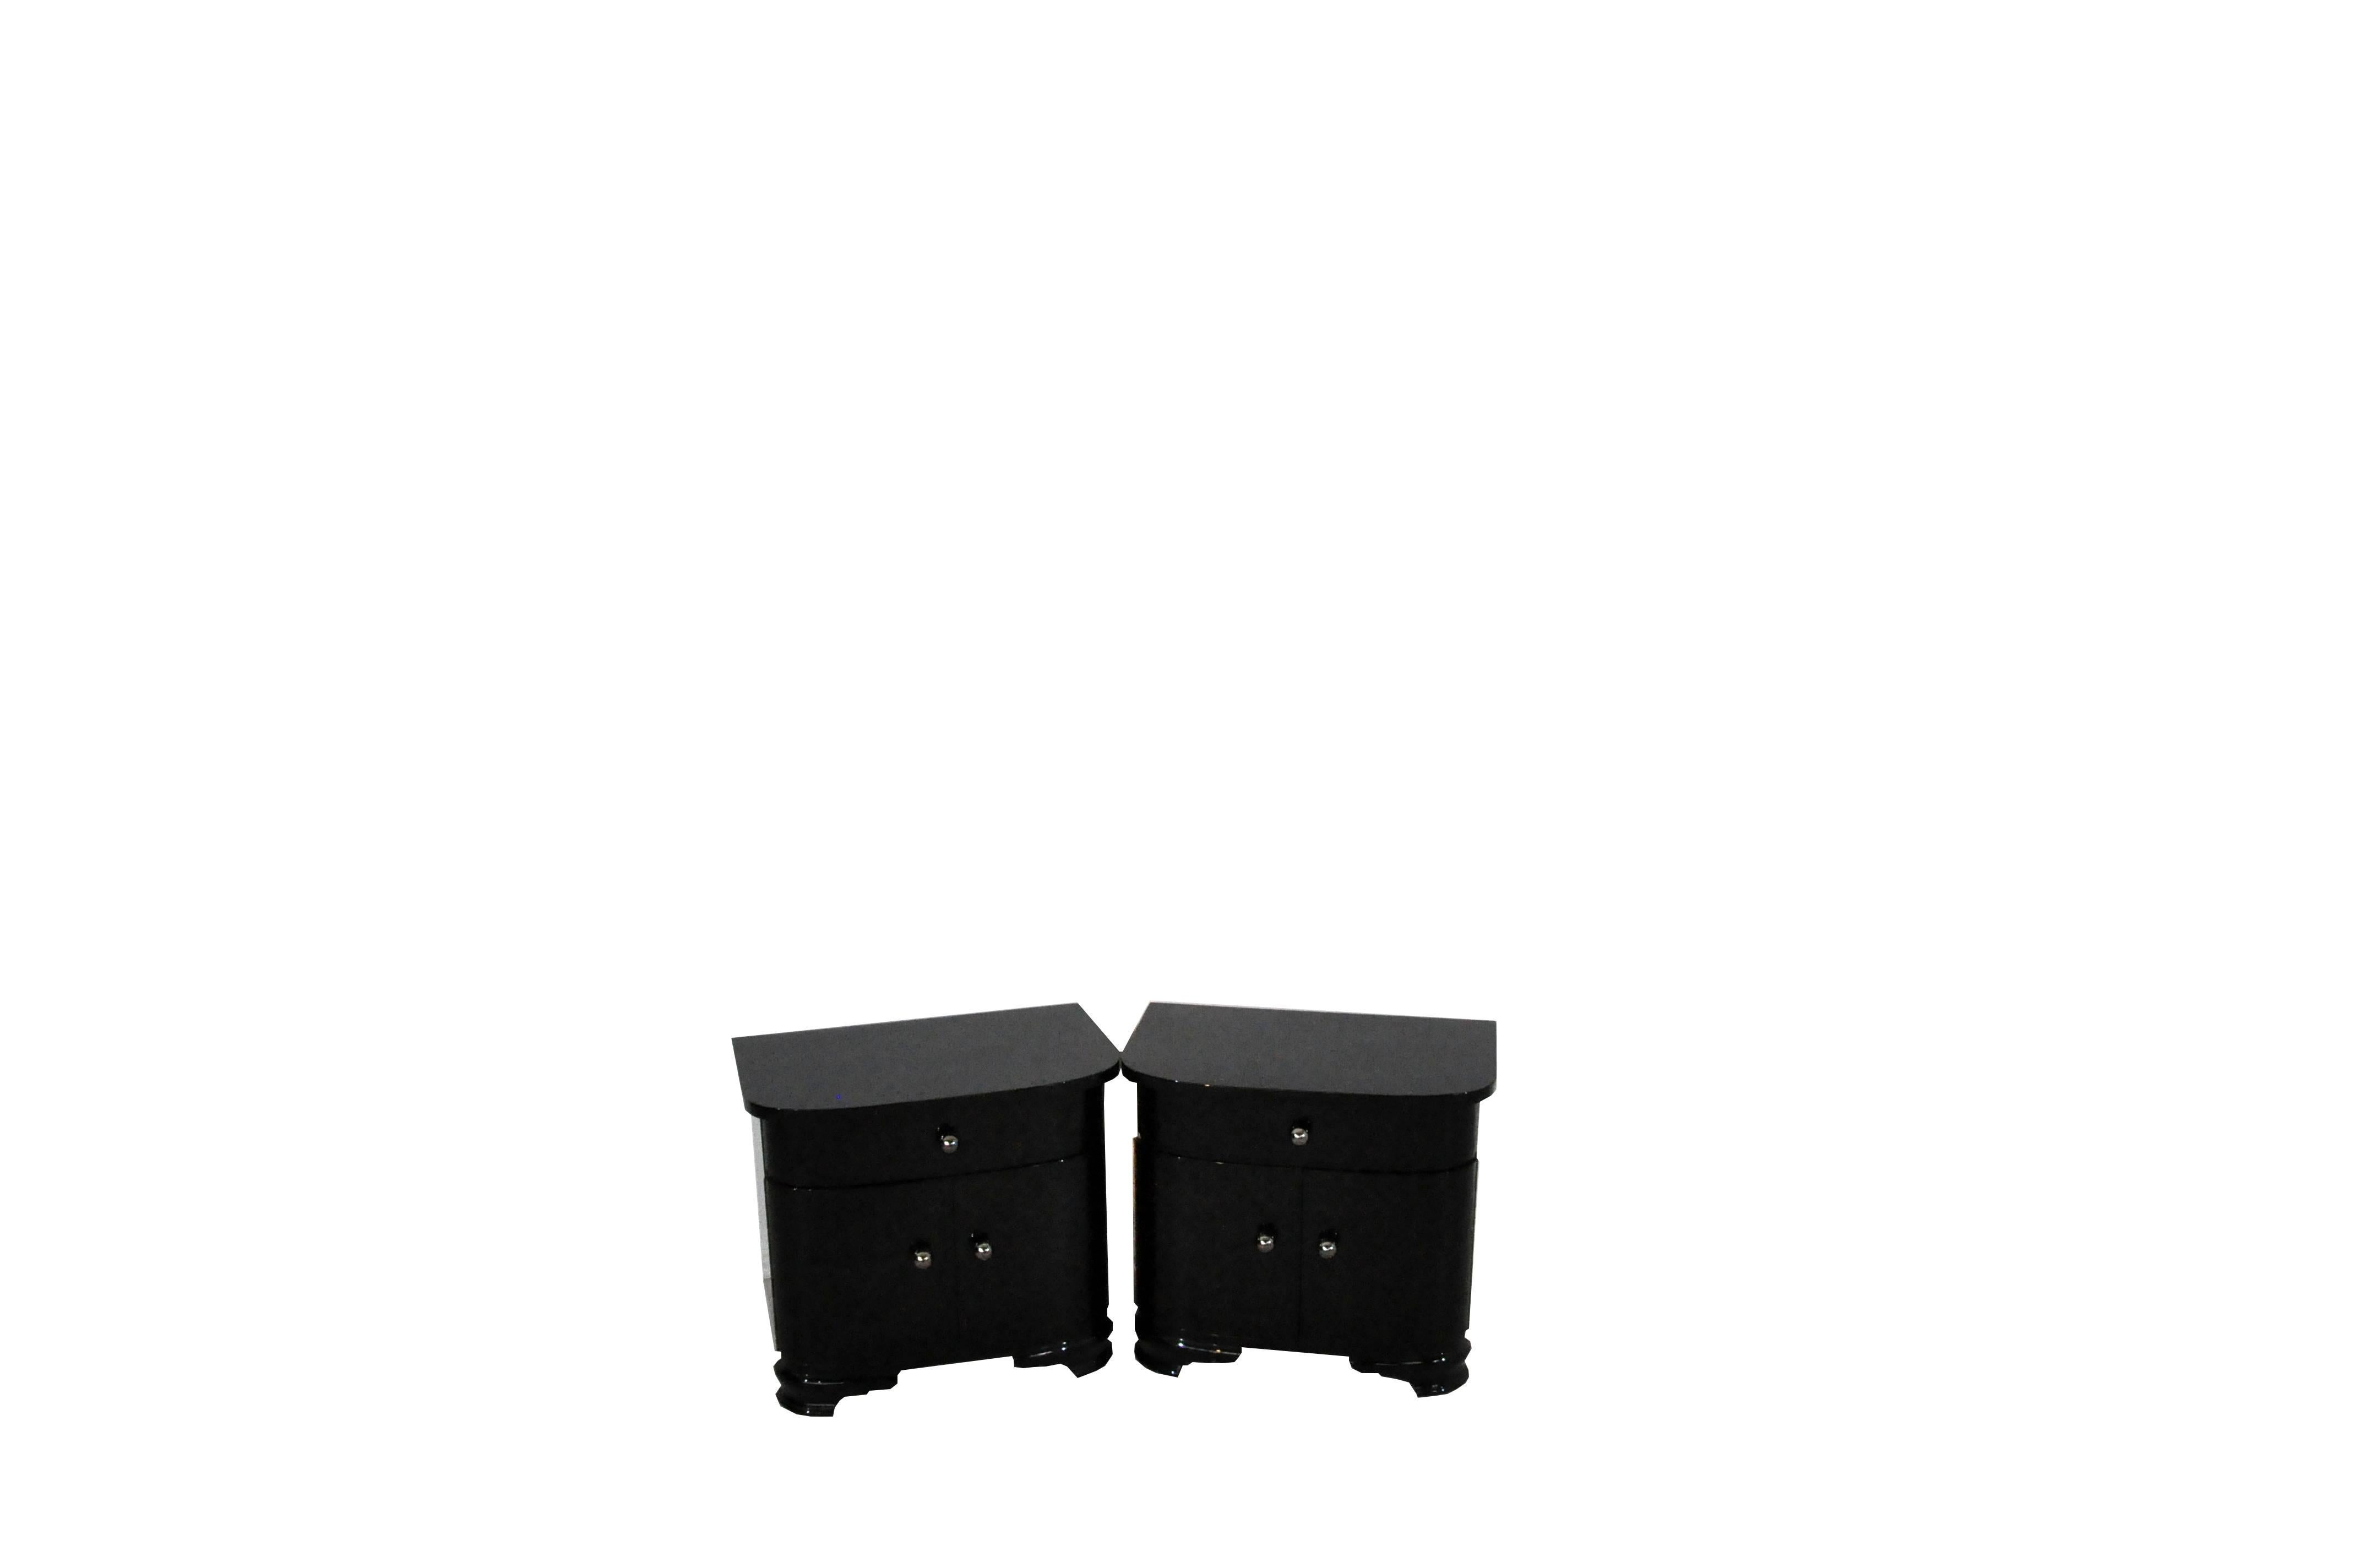 French Pair of Piano Lacquer Night Stands from the Art Deco Era